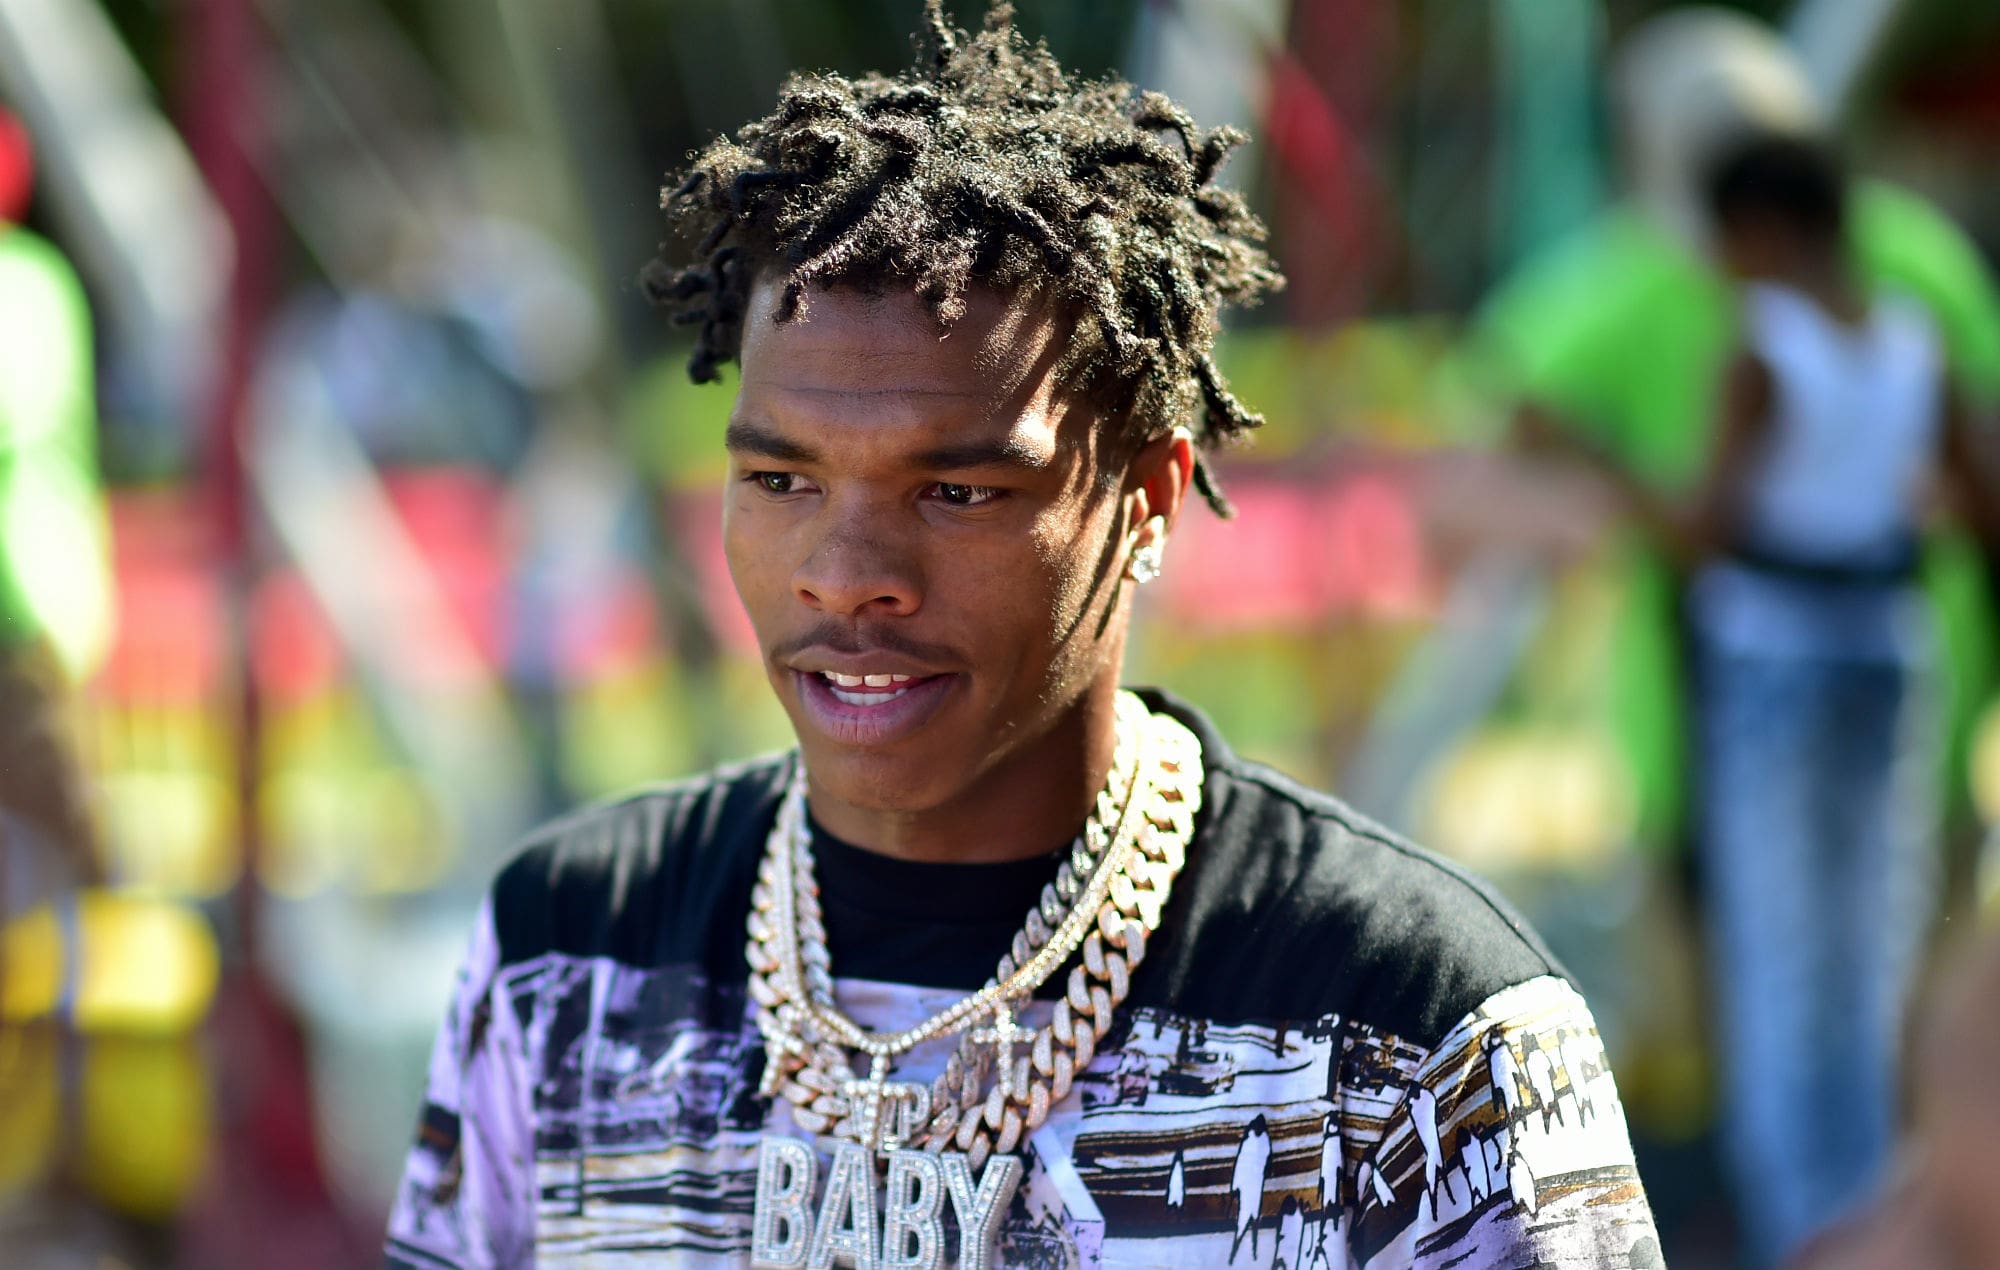 Lil Baby Shares His Thoughts On His Album In An Interview With 'Hits Daily Double'